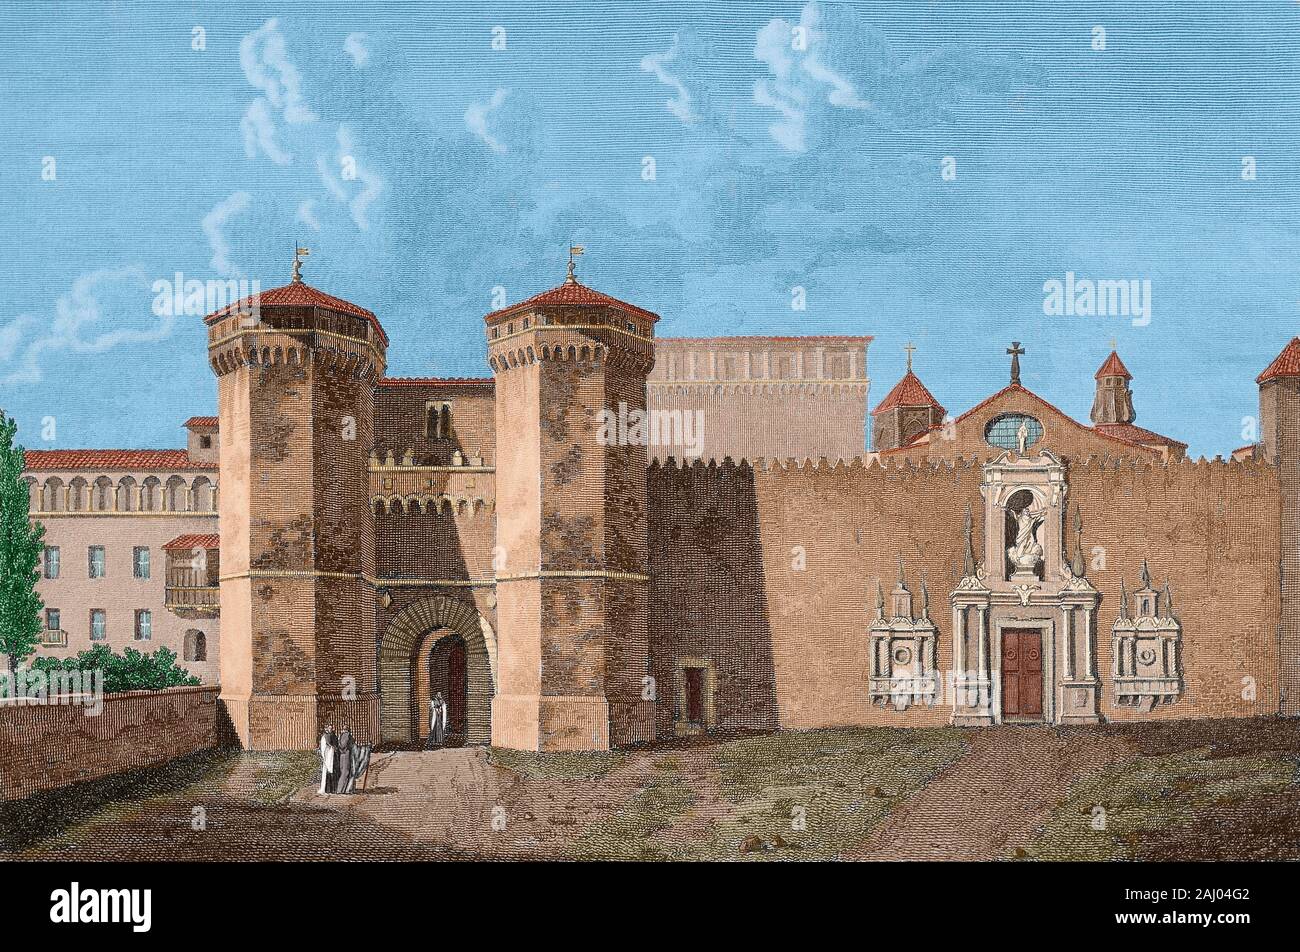 Spain, Catalonia, province of Tarragona, Vimbodi. Royal Abbey of Santa Maria de Poblet. Main entrance, according Alexandre Laborde in 'Voyage Pittoresque et Historique en Espagne' (1806). Cistercian monastery founded in 1151. Drawing by Ligier. Engraving by Lorieux. Later colouration. Stock Photo